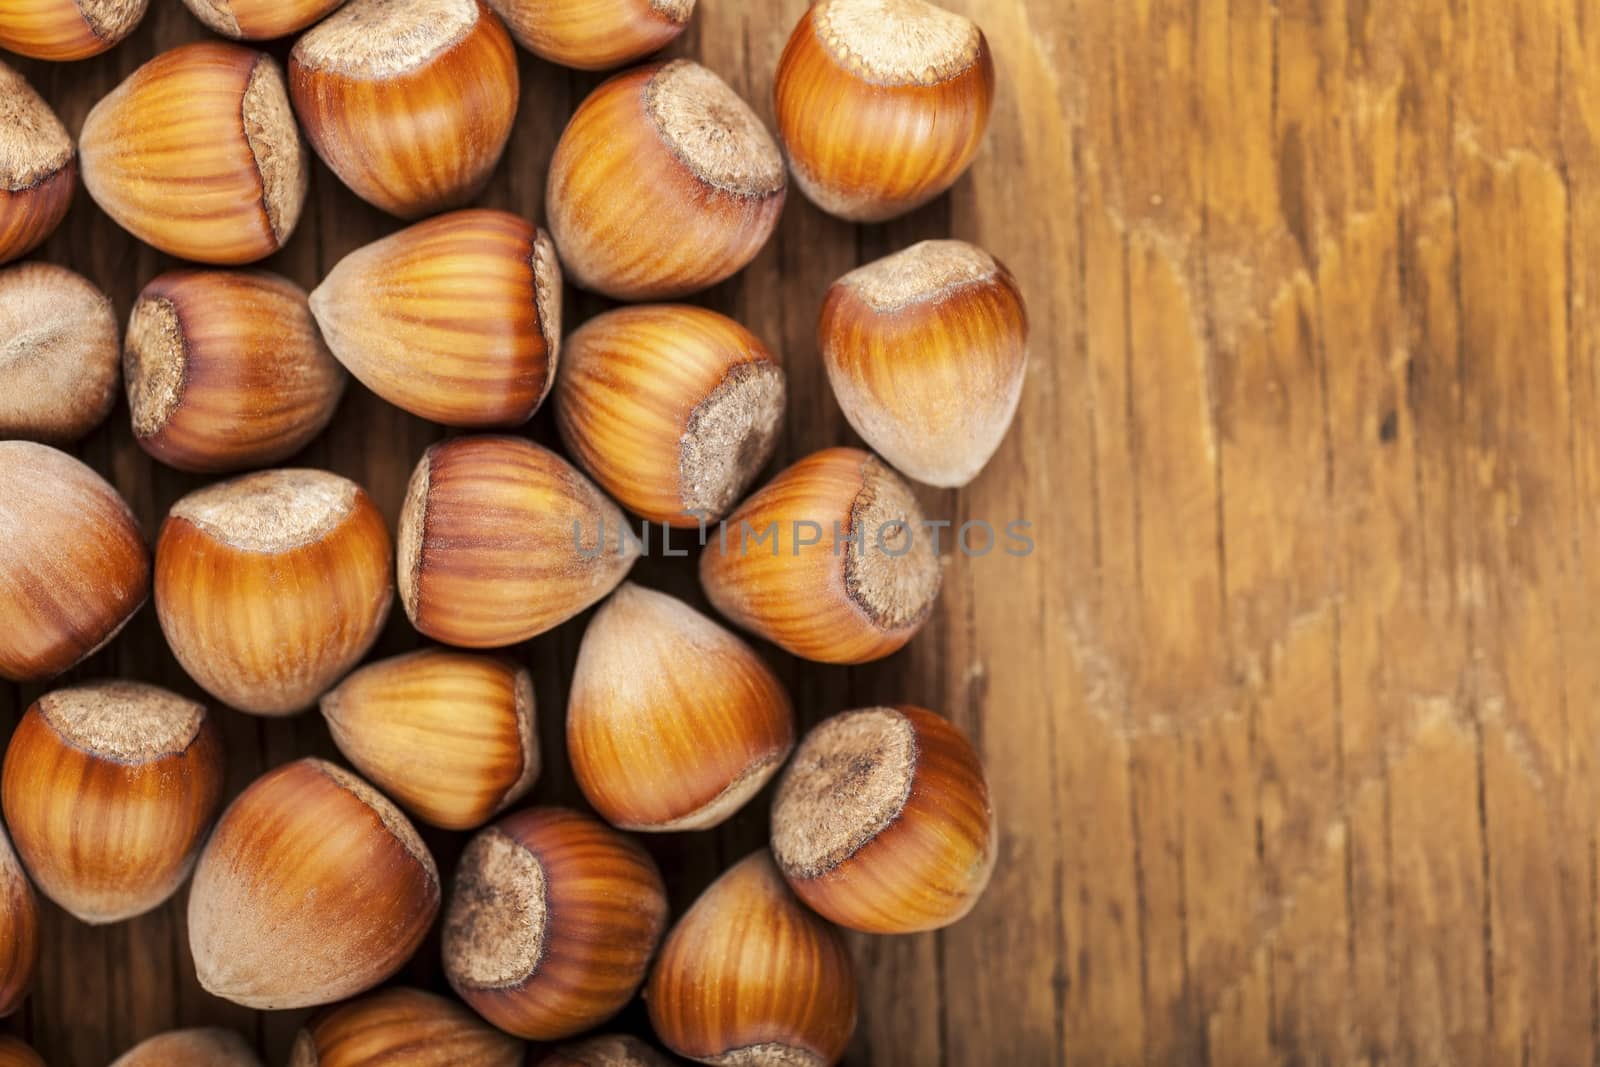  whole tree nuts close-up on wooden background